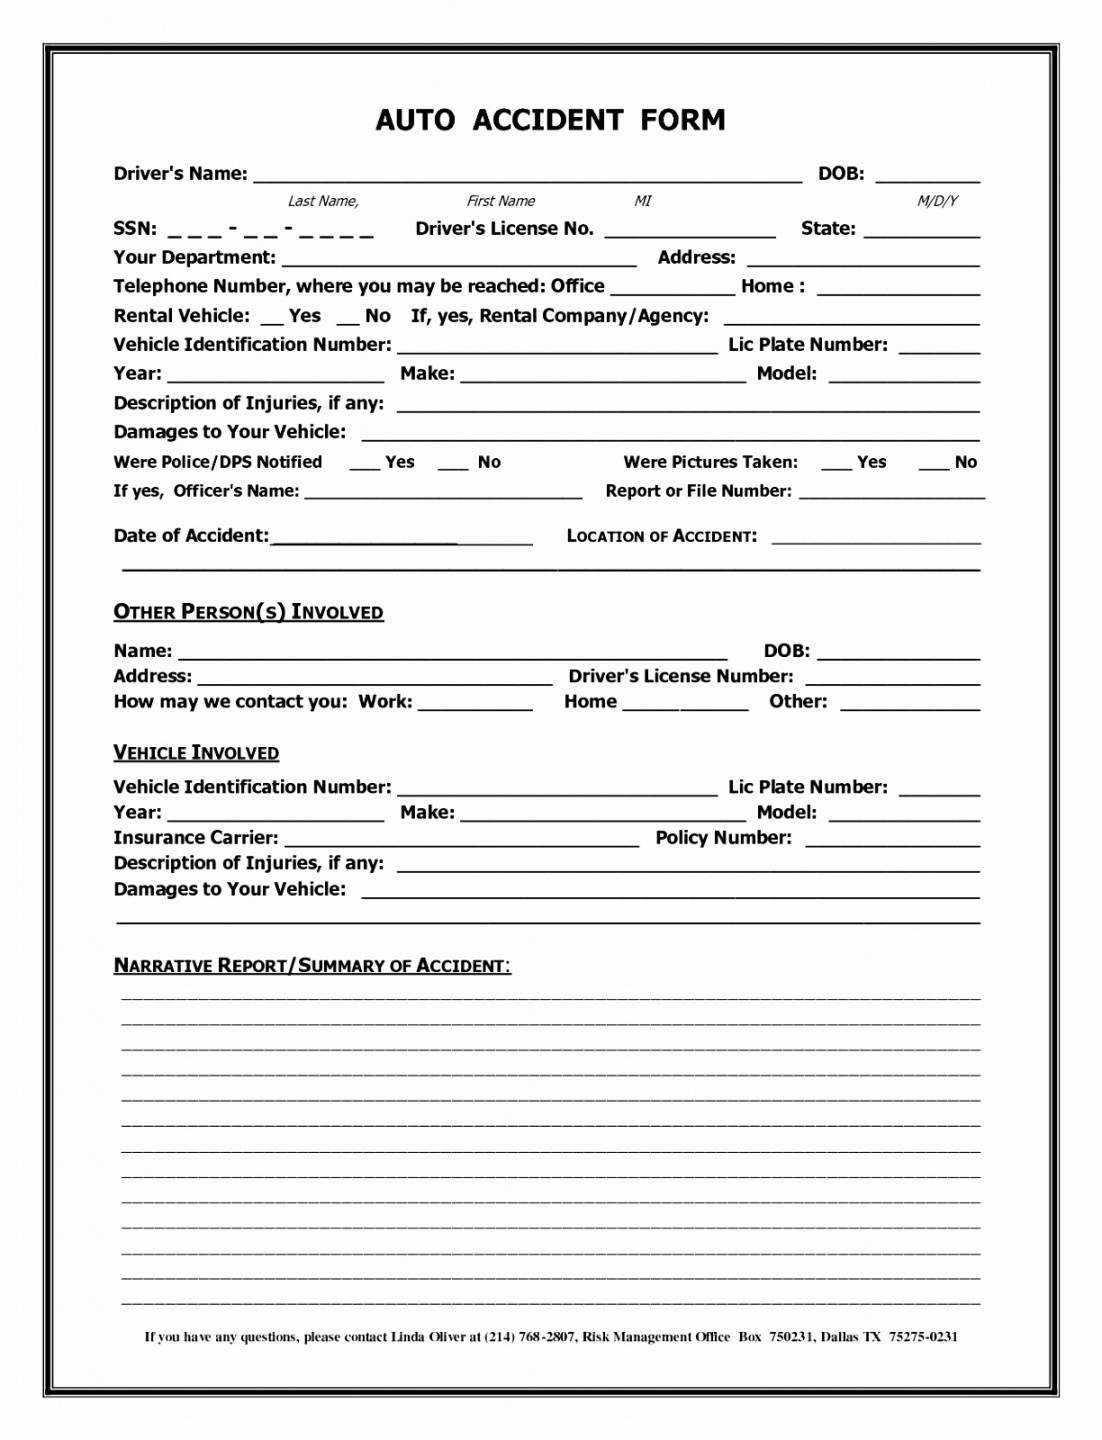 004 Template Ideas Accident Reporting Form Report Uk Of Regarding Motor Vehicle Accident Report Form Template